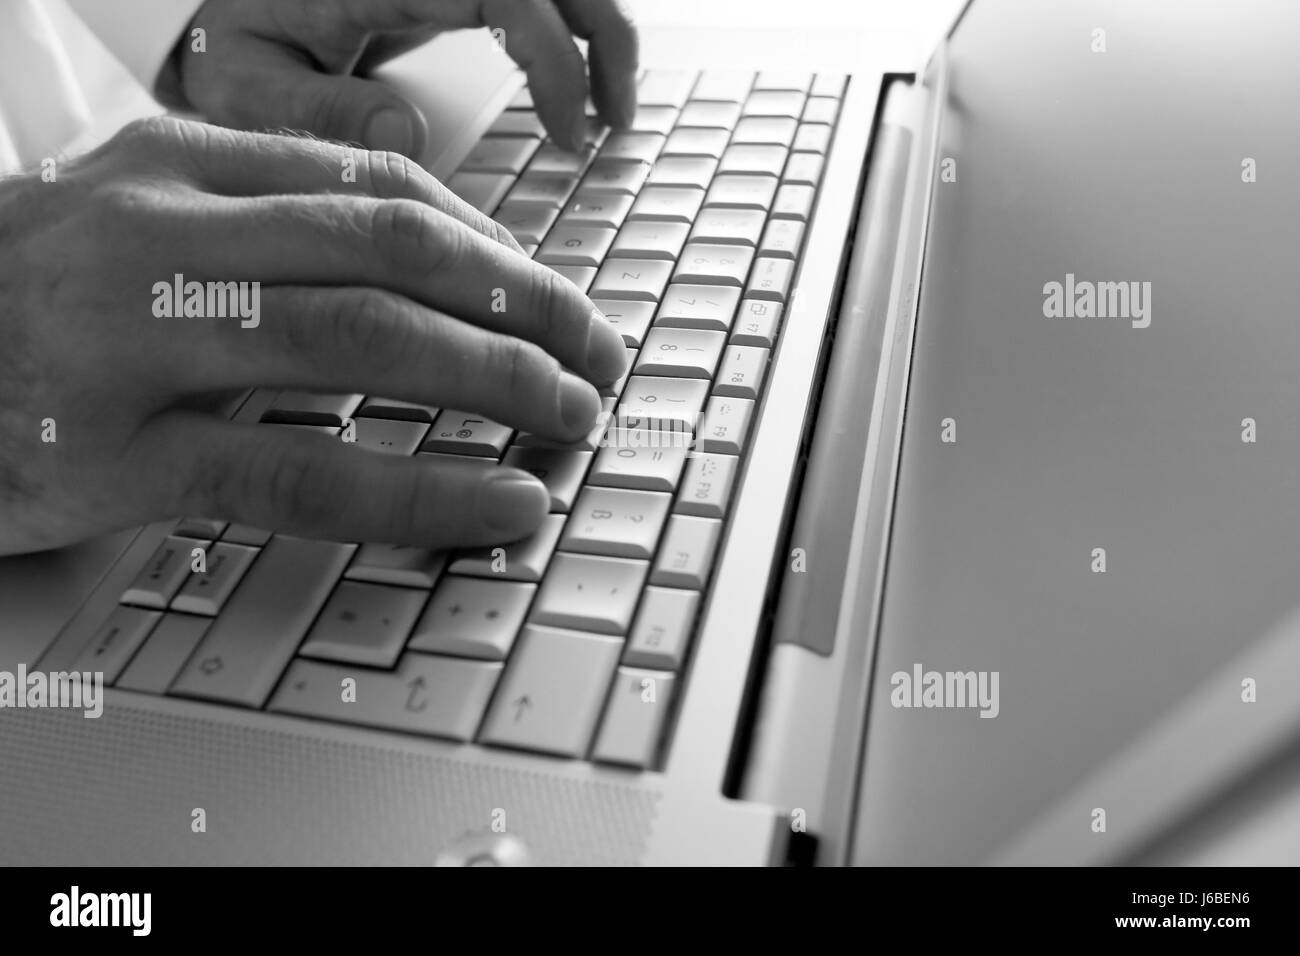 silver colored laptop Stock Photo